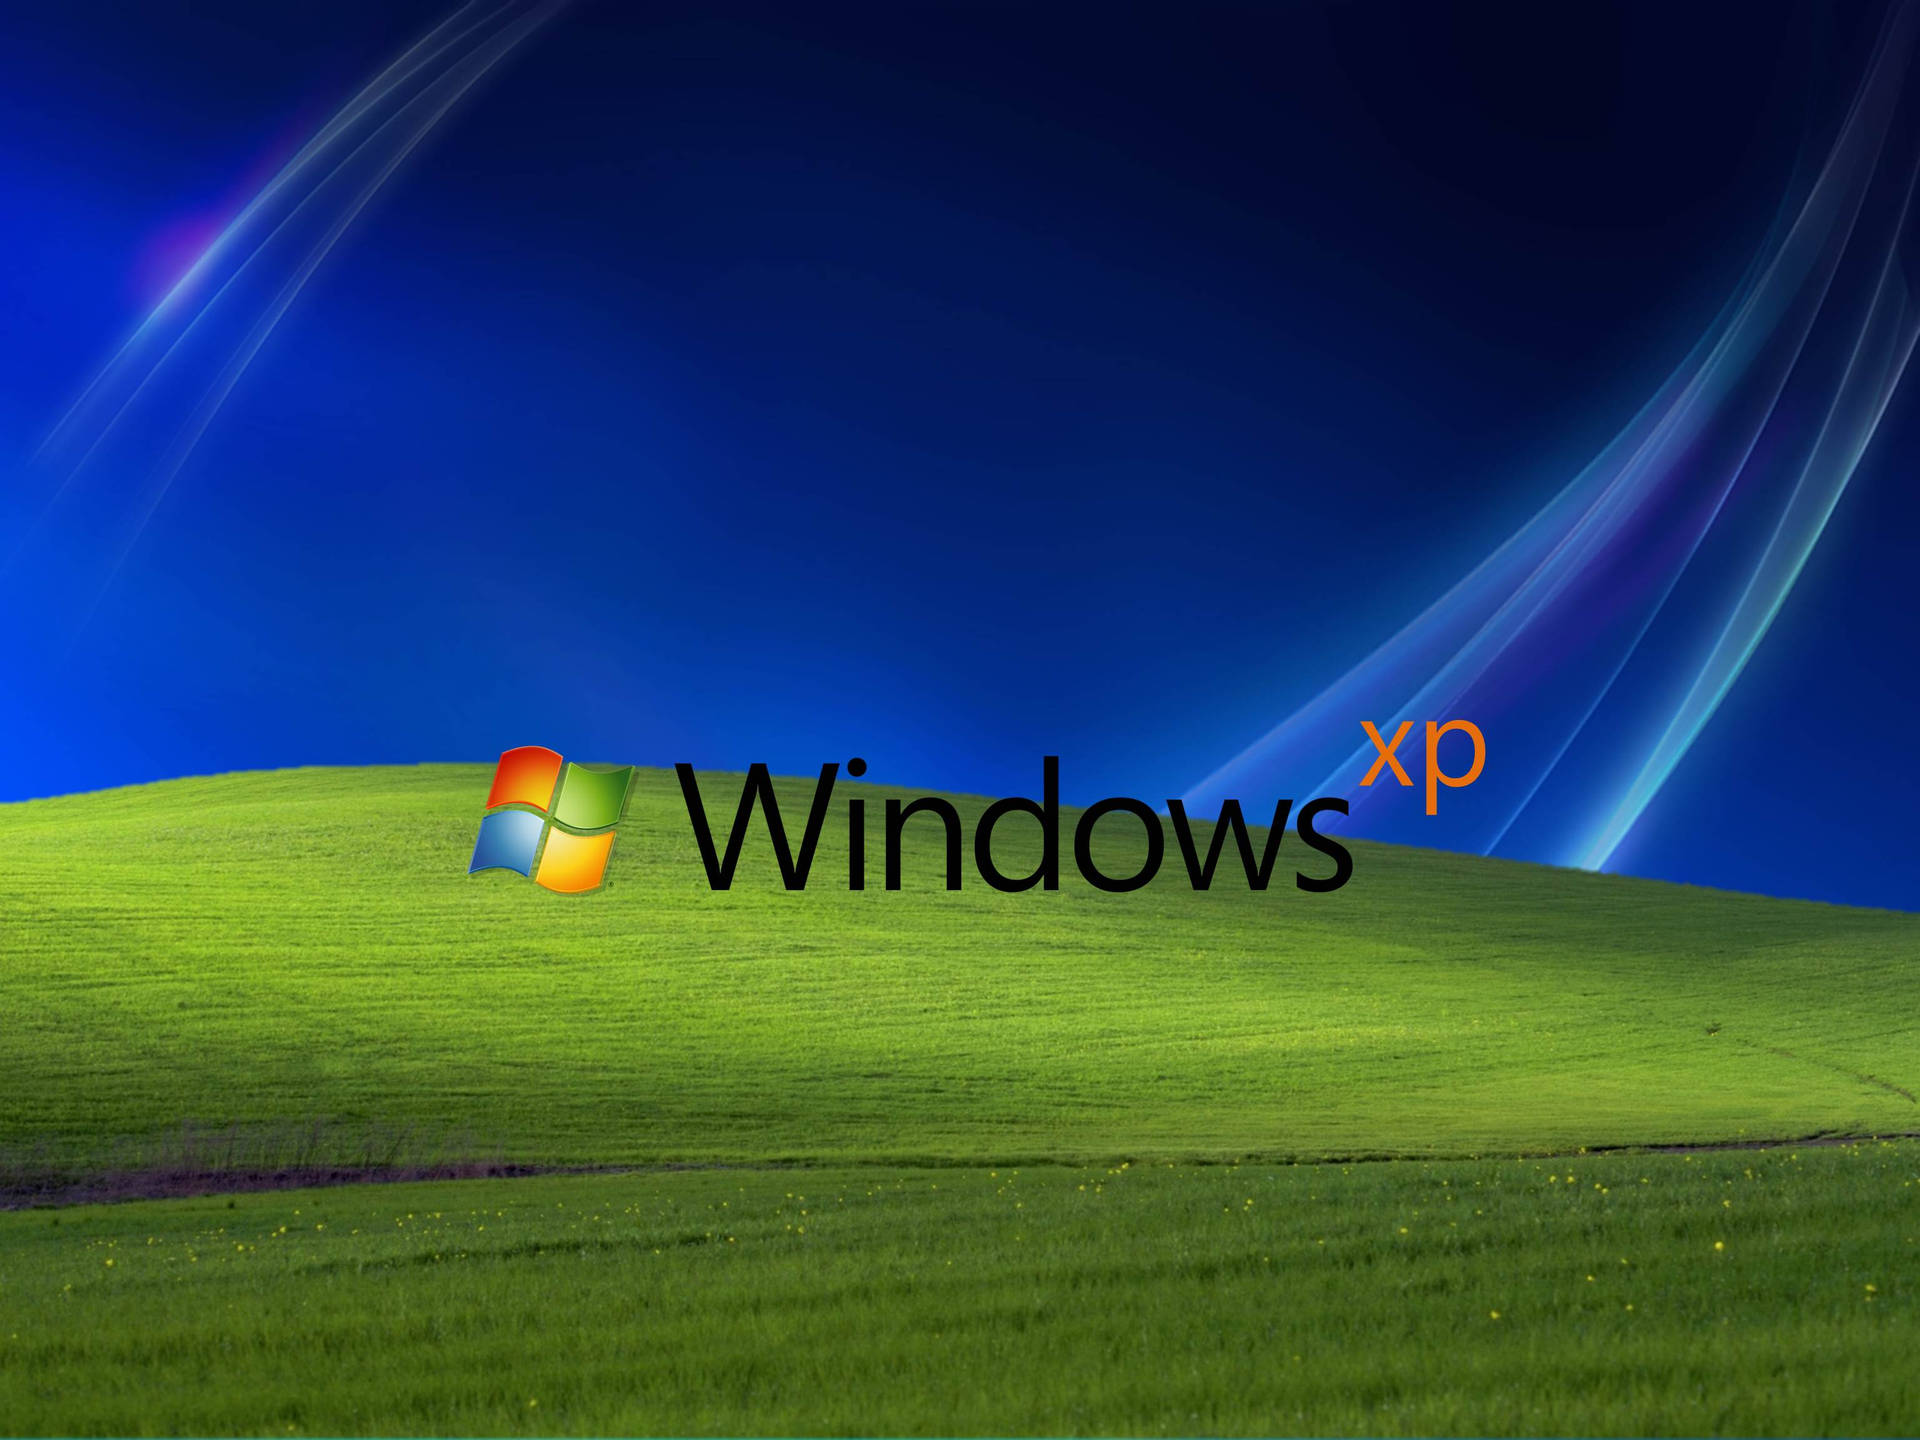 Windows Xp 3070X2302 Wallpaper and Background Image